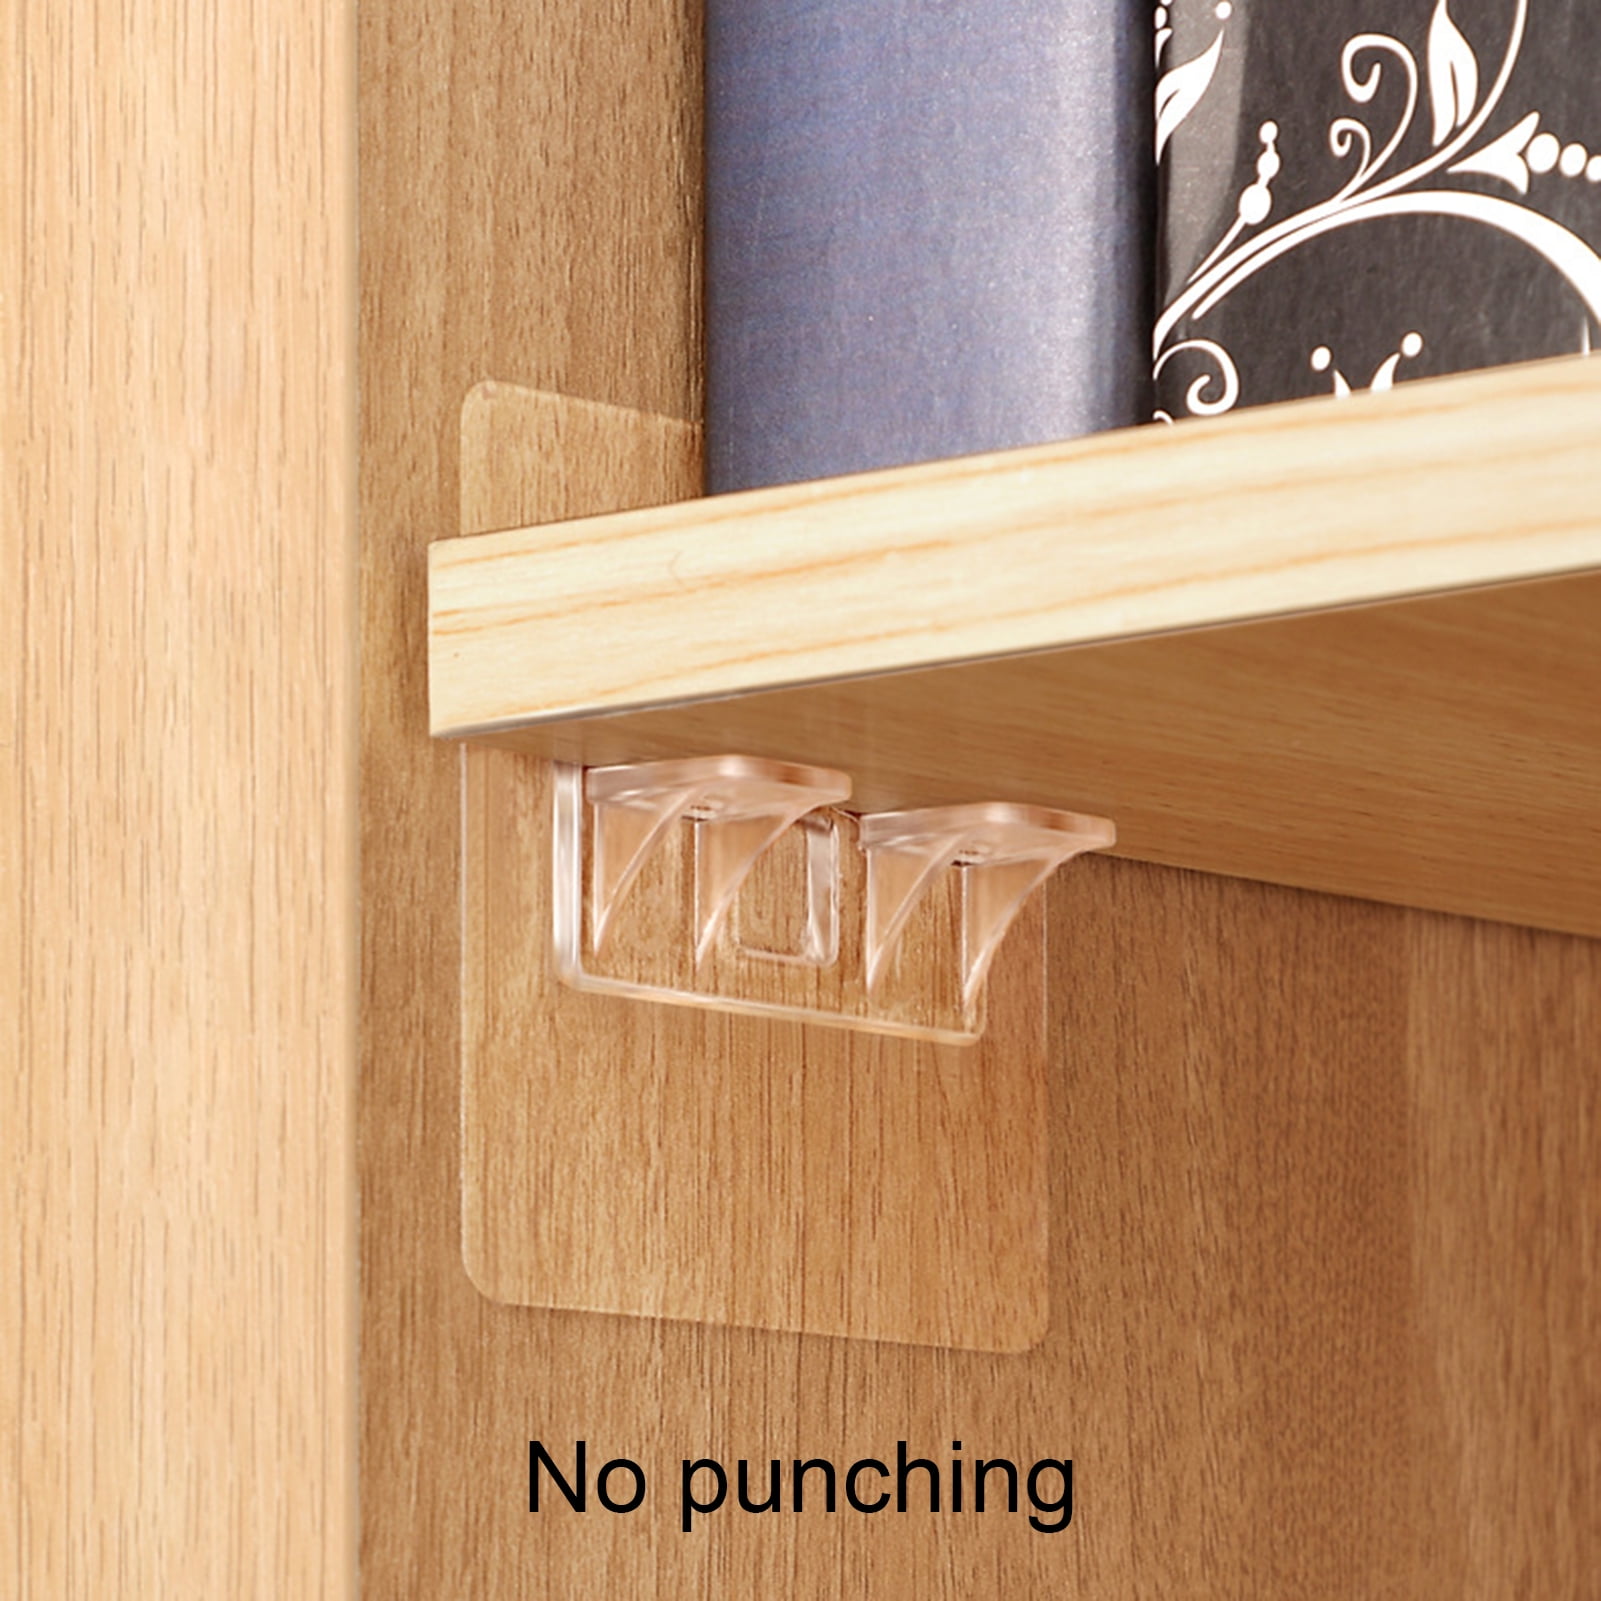 4pcs Shelf Support Pegs, Punch-free Adhesive Shelf Bracket, Partition Pin  For Kitchen Cabinet Shelves Clapboard